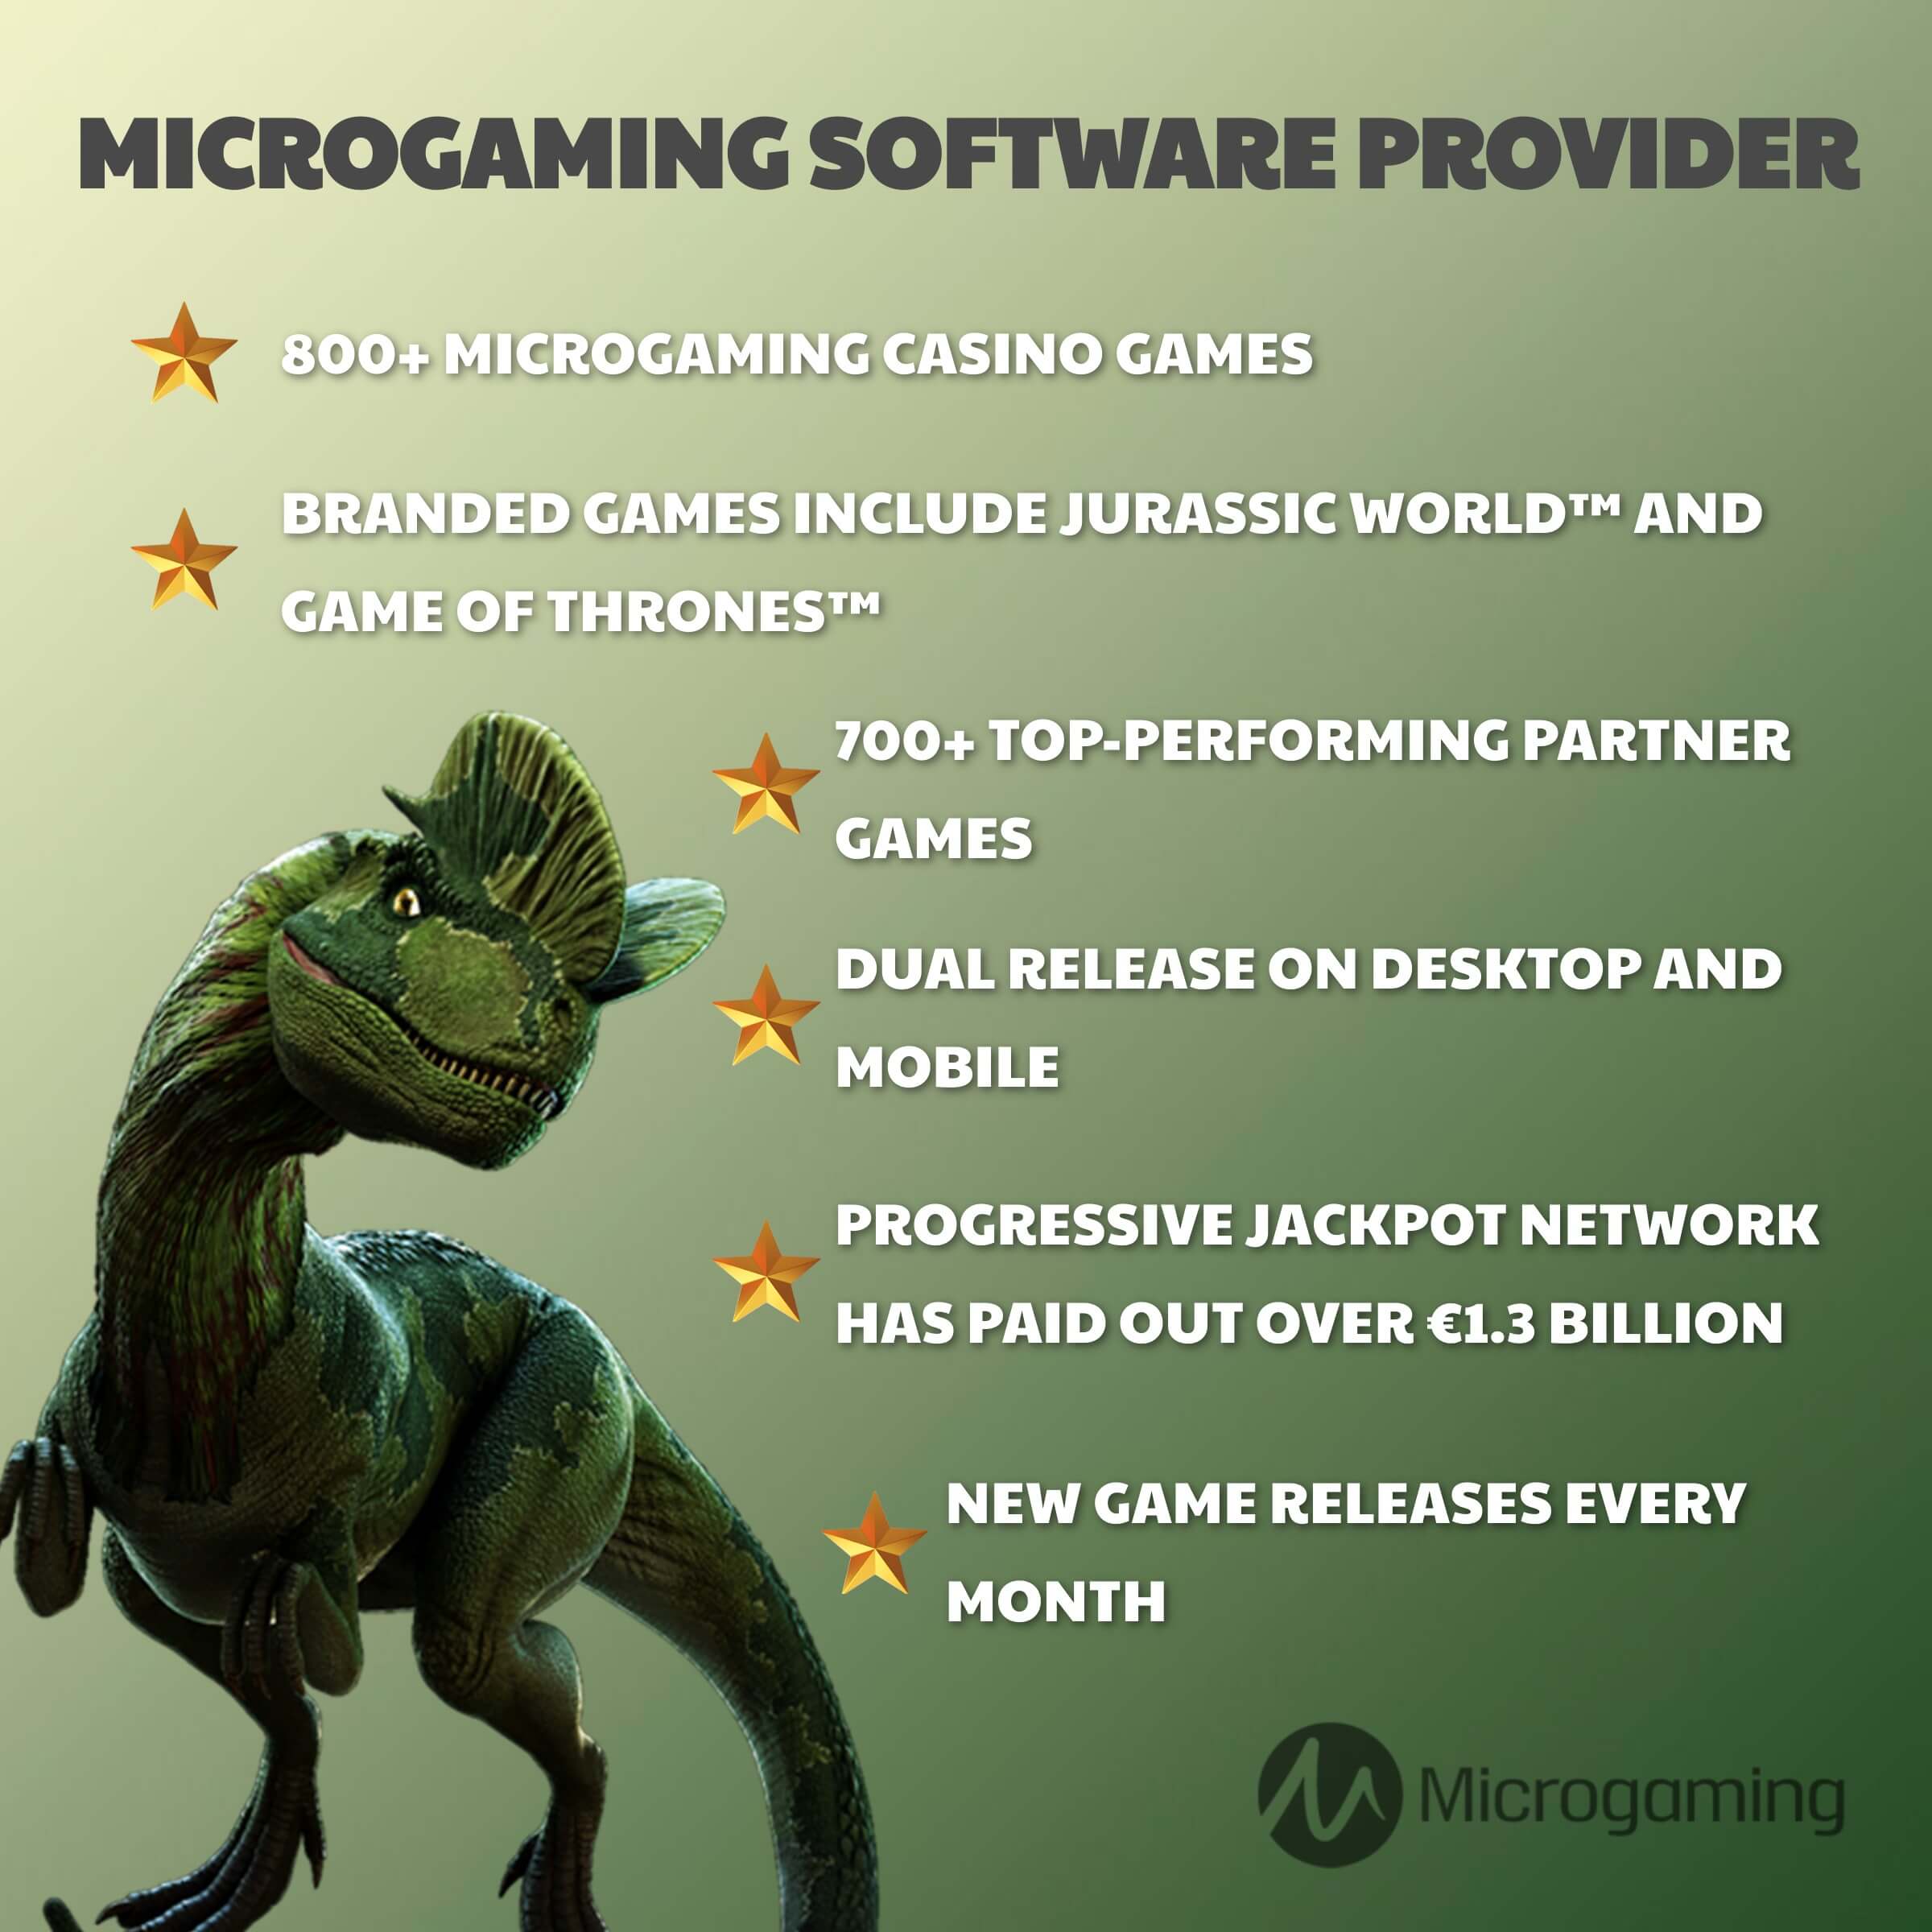 microgaming-software-provider.jpg?profile=RESIZE_710x